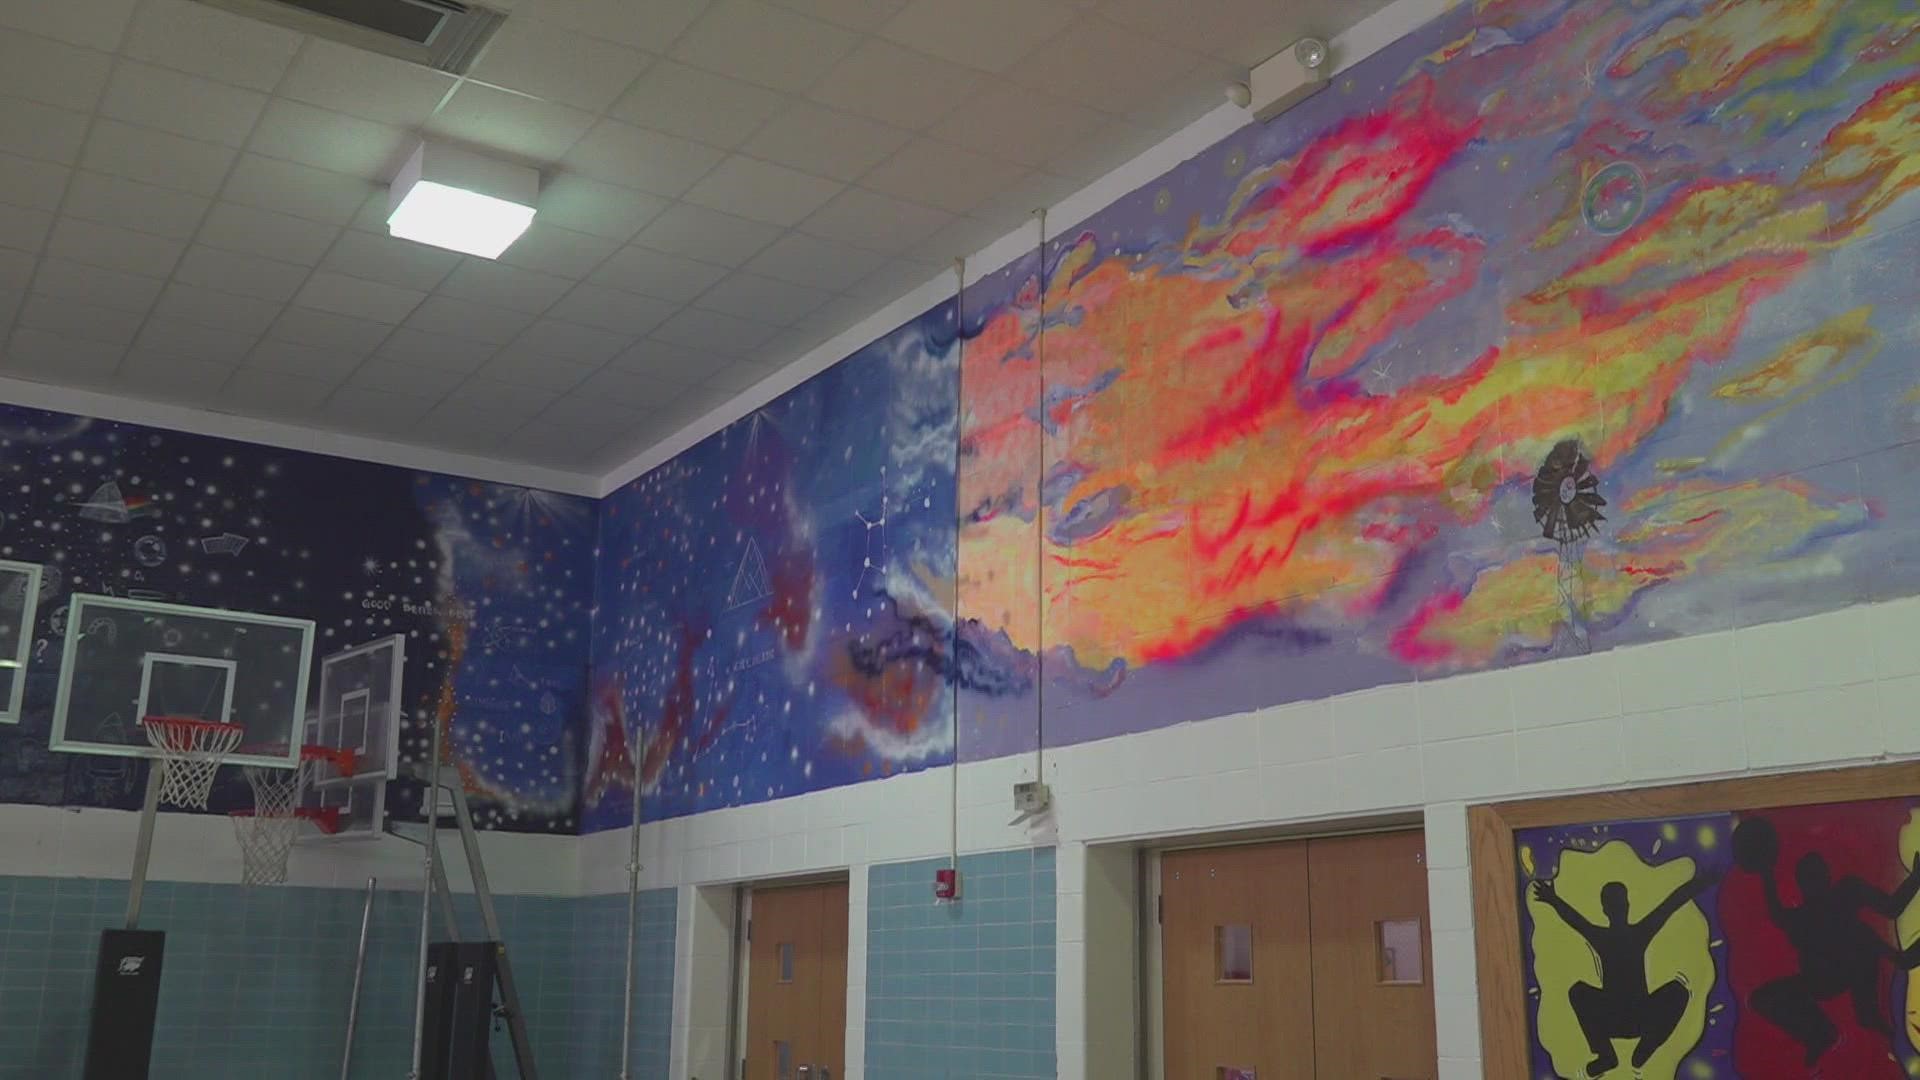 The mural was painted by local artist Tabata Ayup, and it wraps around the cafeteria.